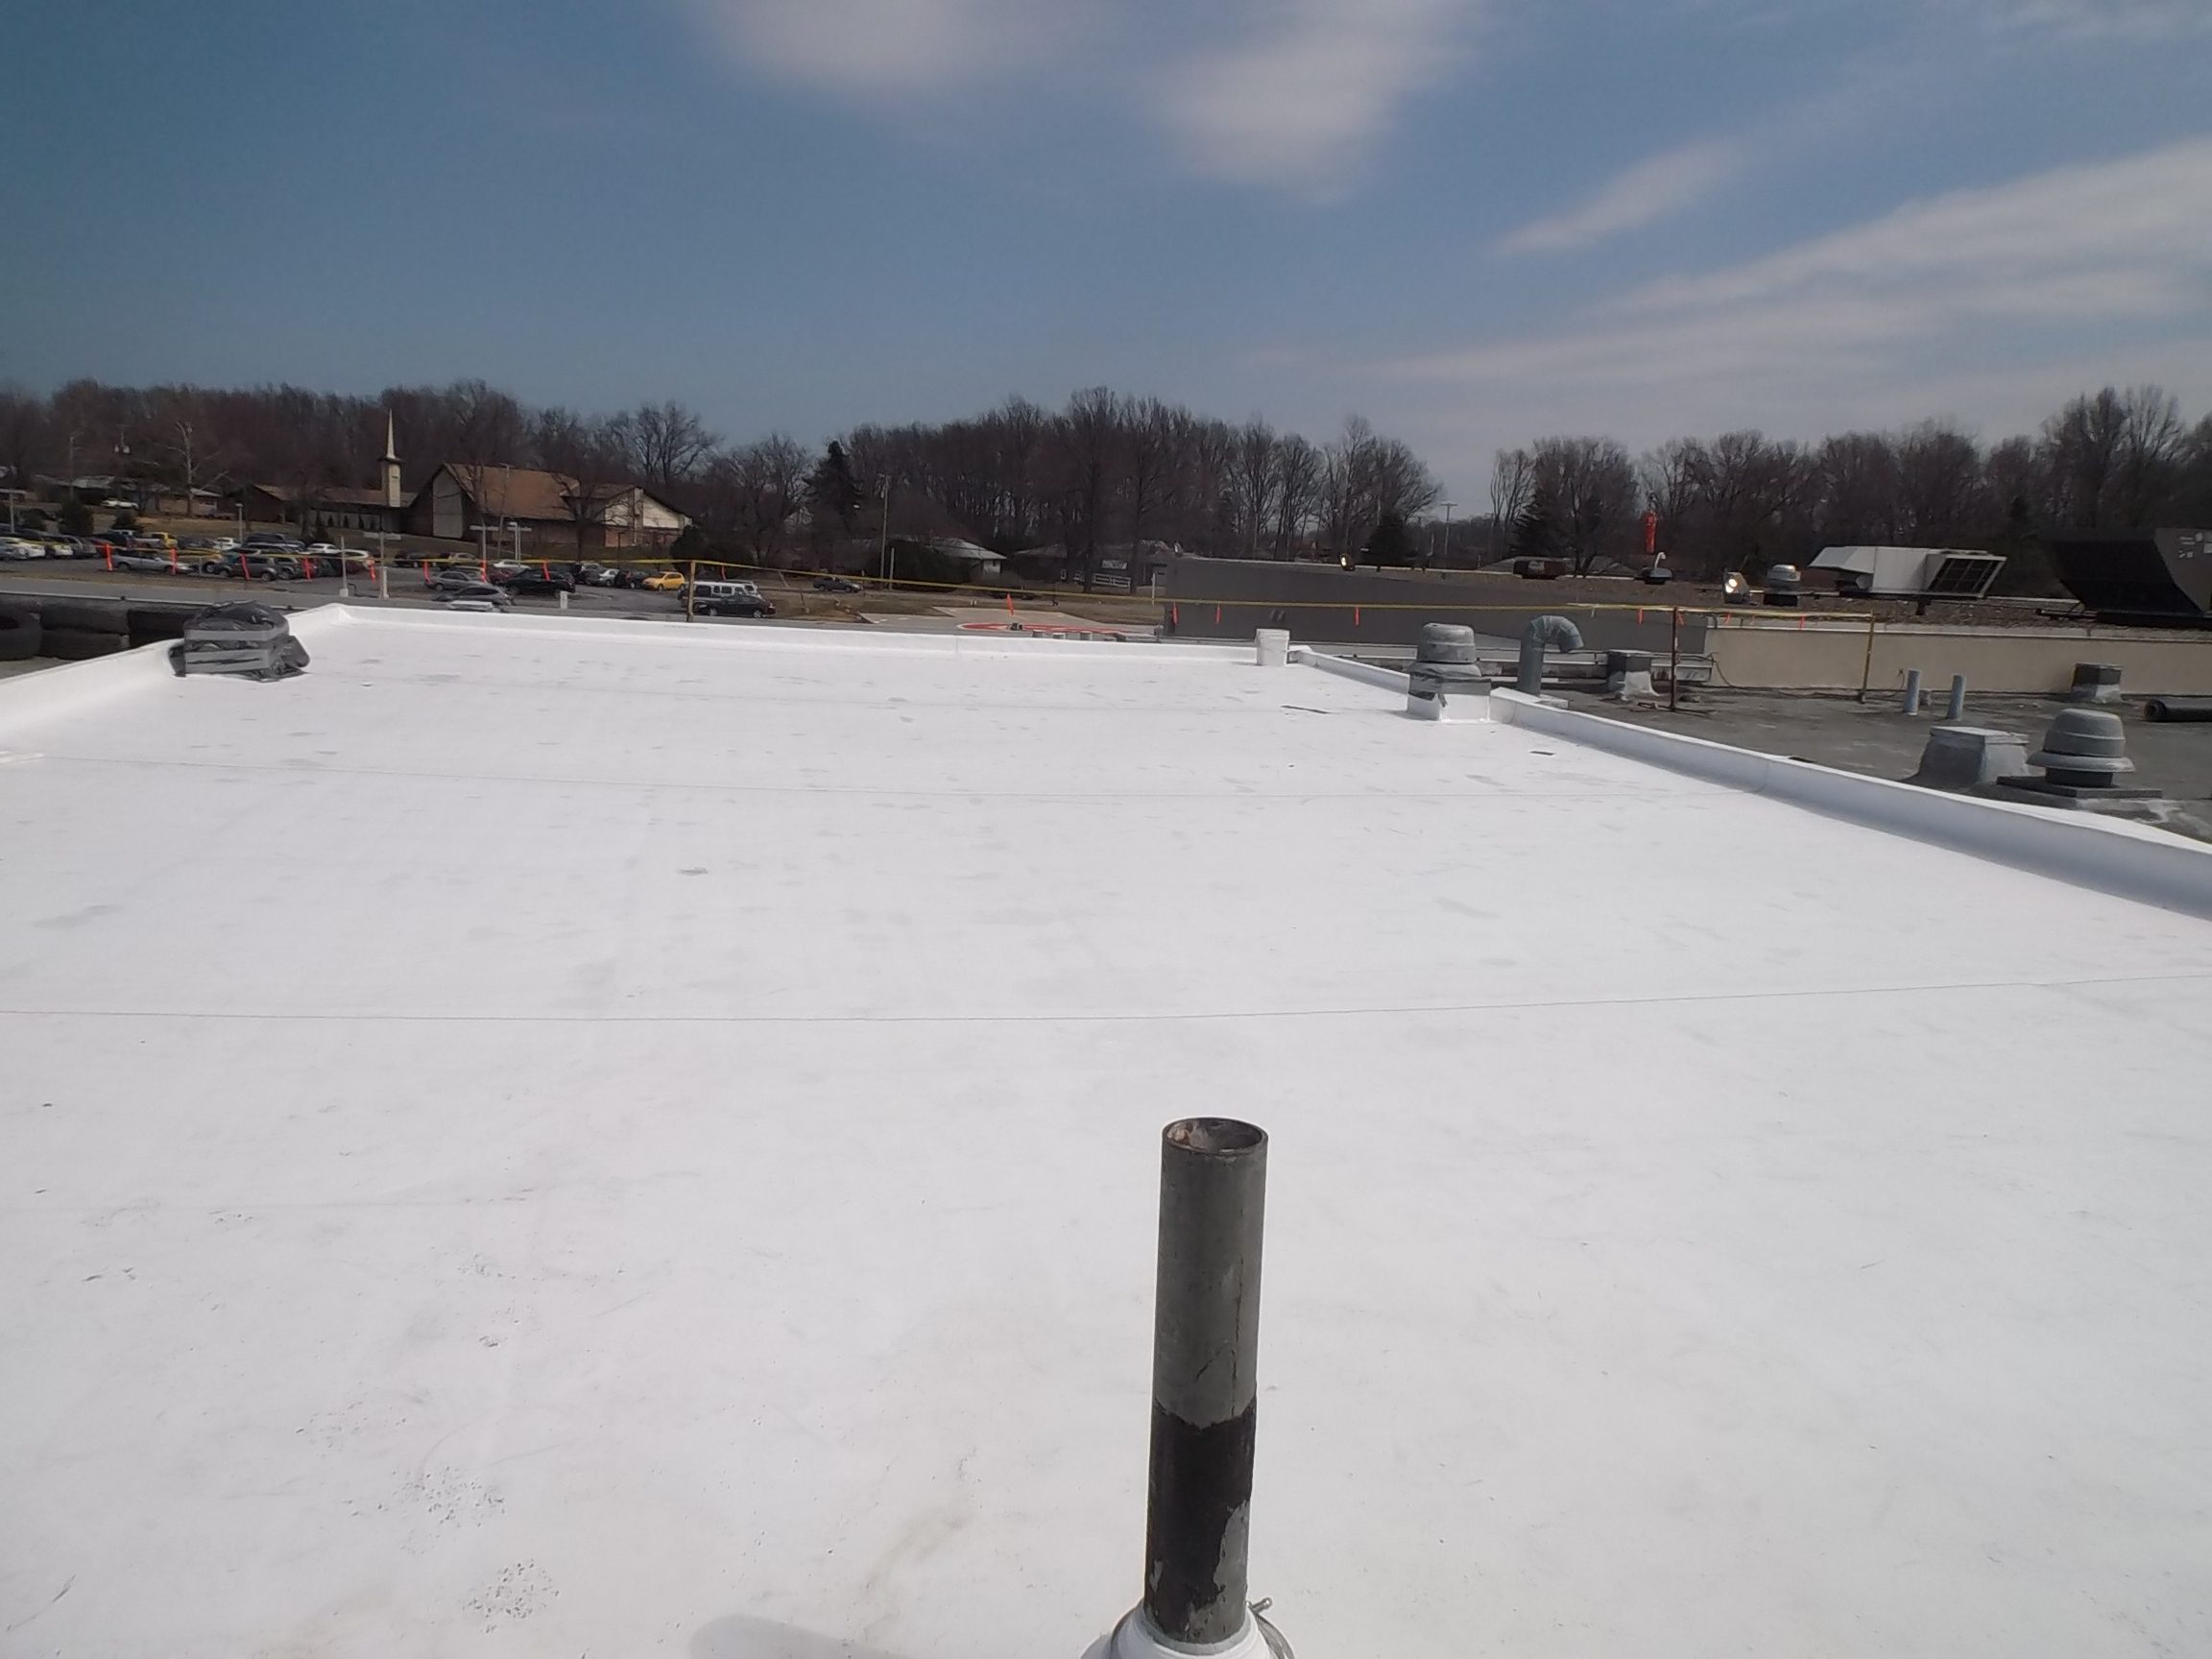 West Roofing Systems installs Single Ply Membrane Roof